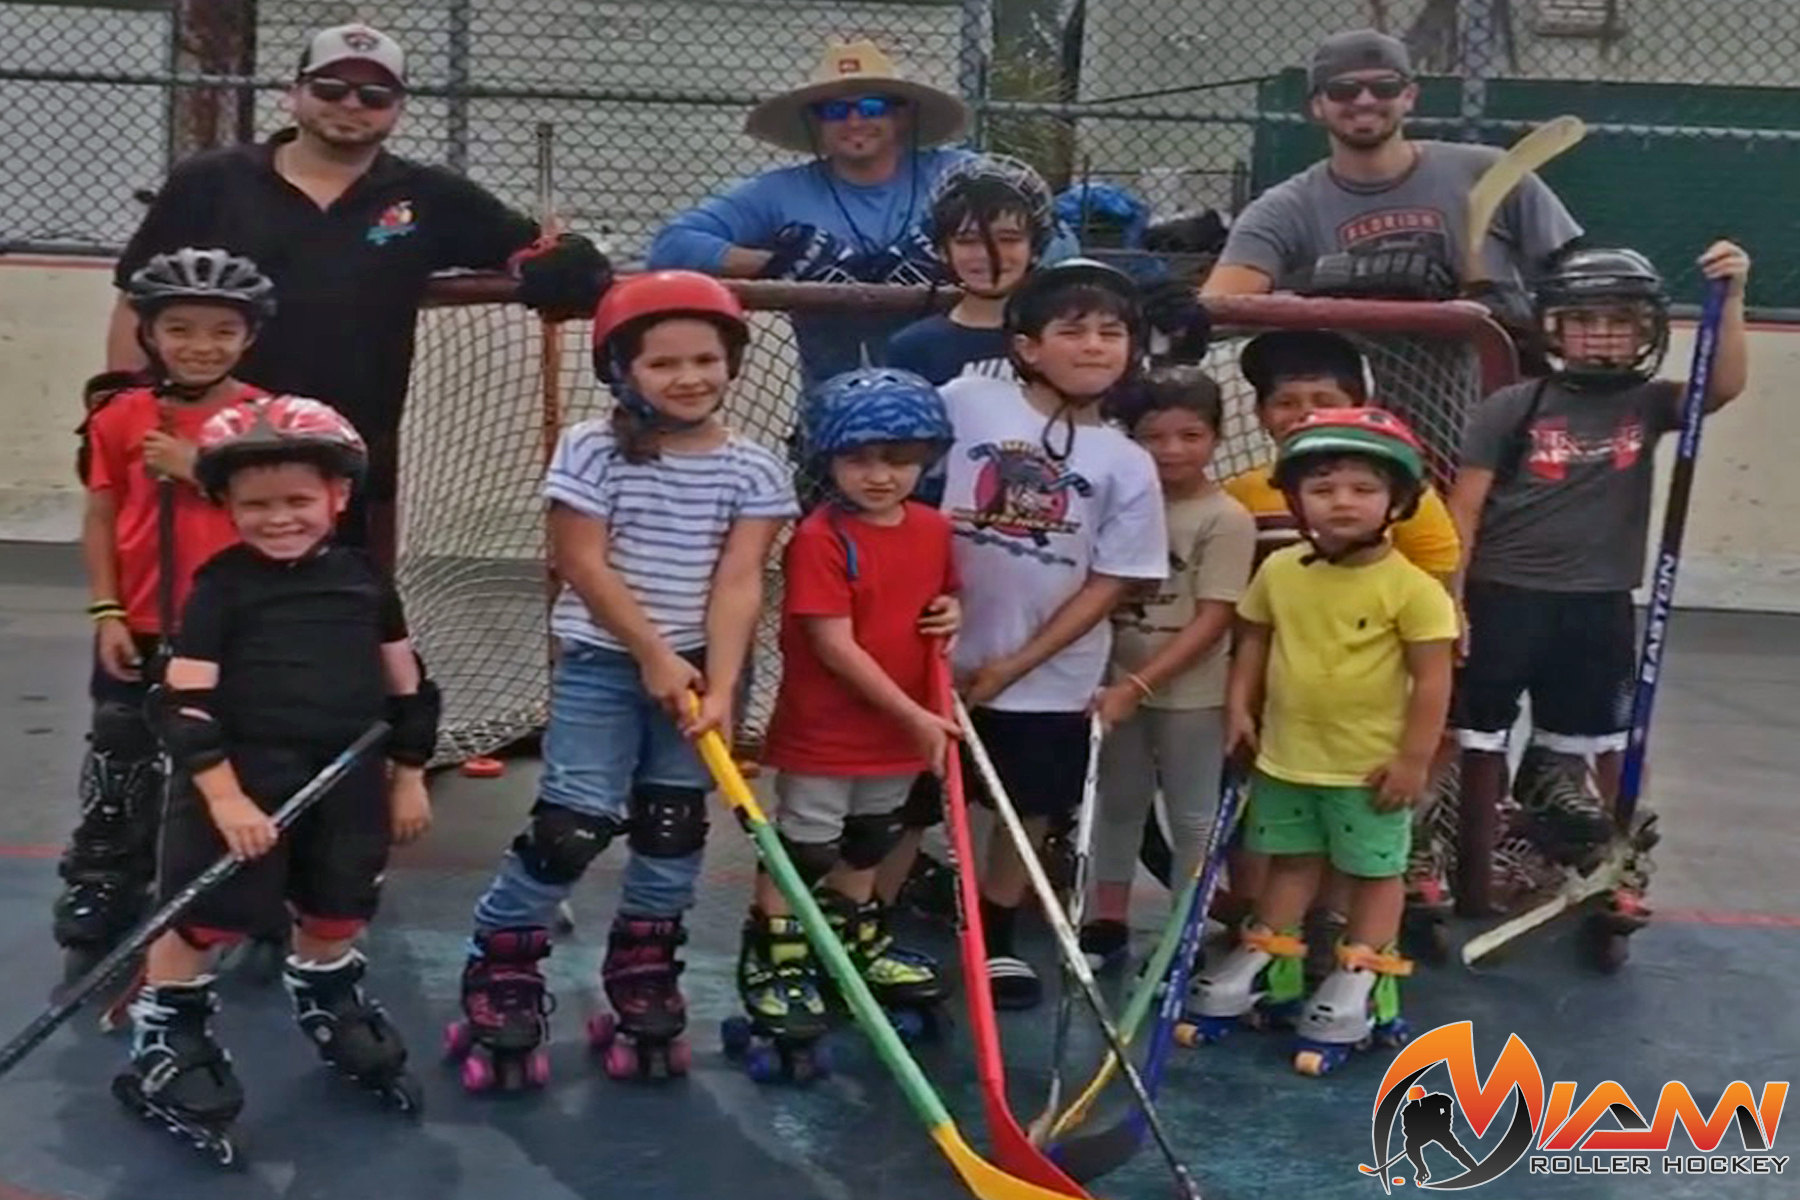 Youth roller hockey keeps kids active and connected in the community